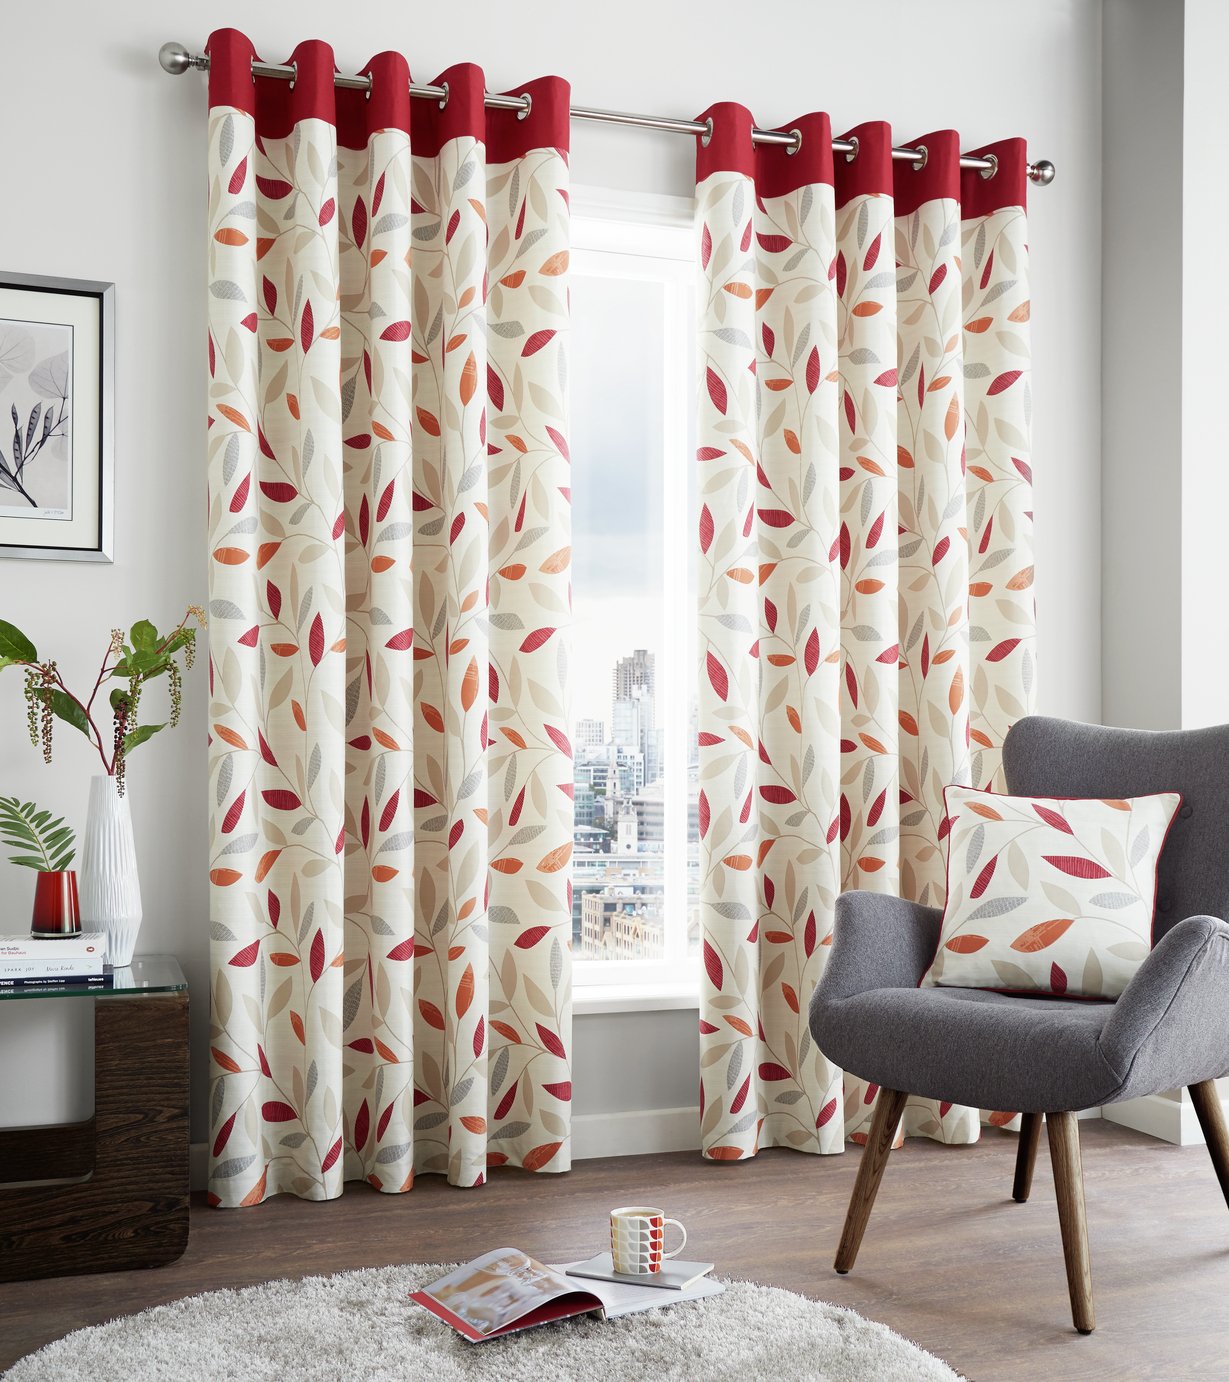 Fusion Beechwood Lined Curtains - 117x183cm - Red.